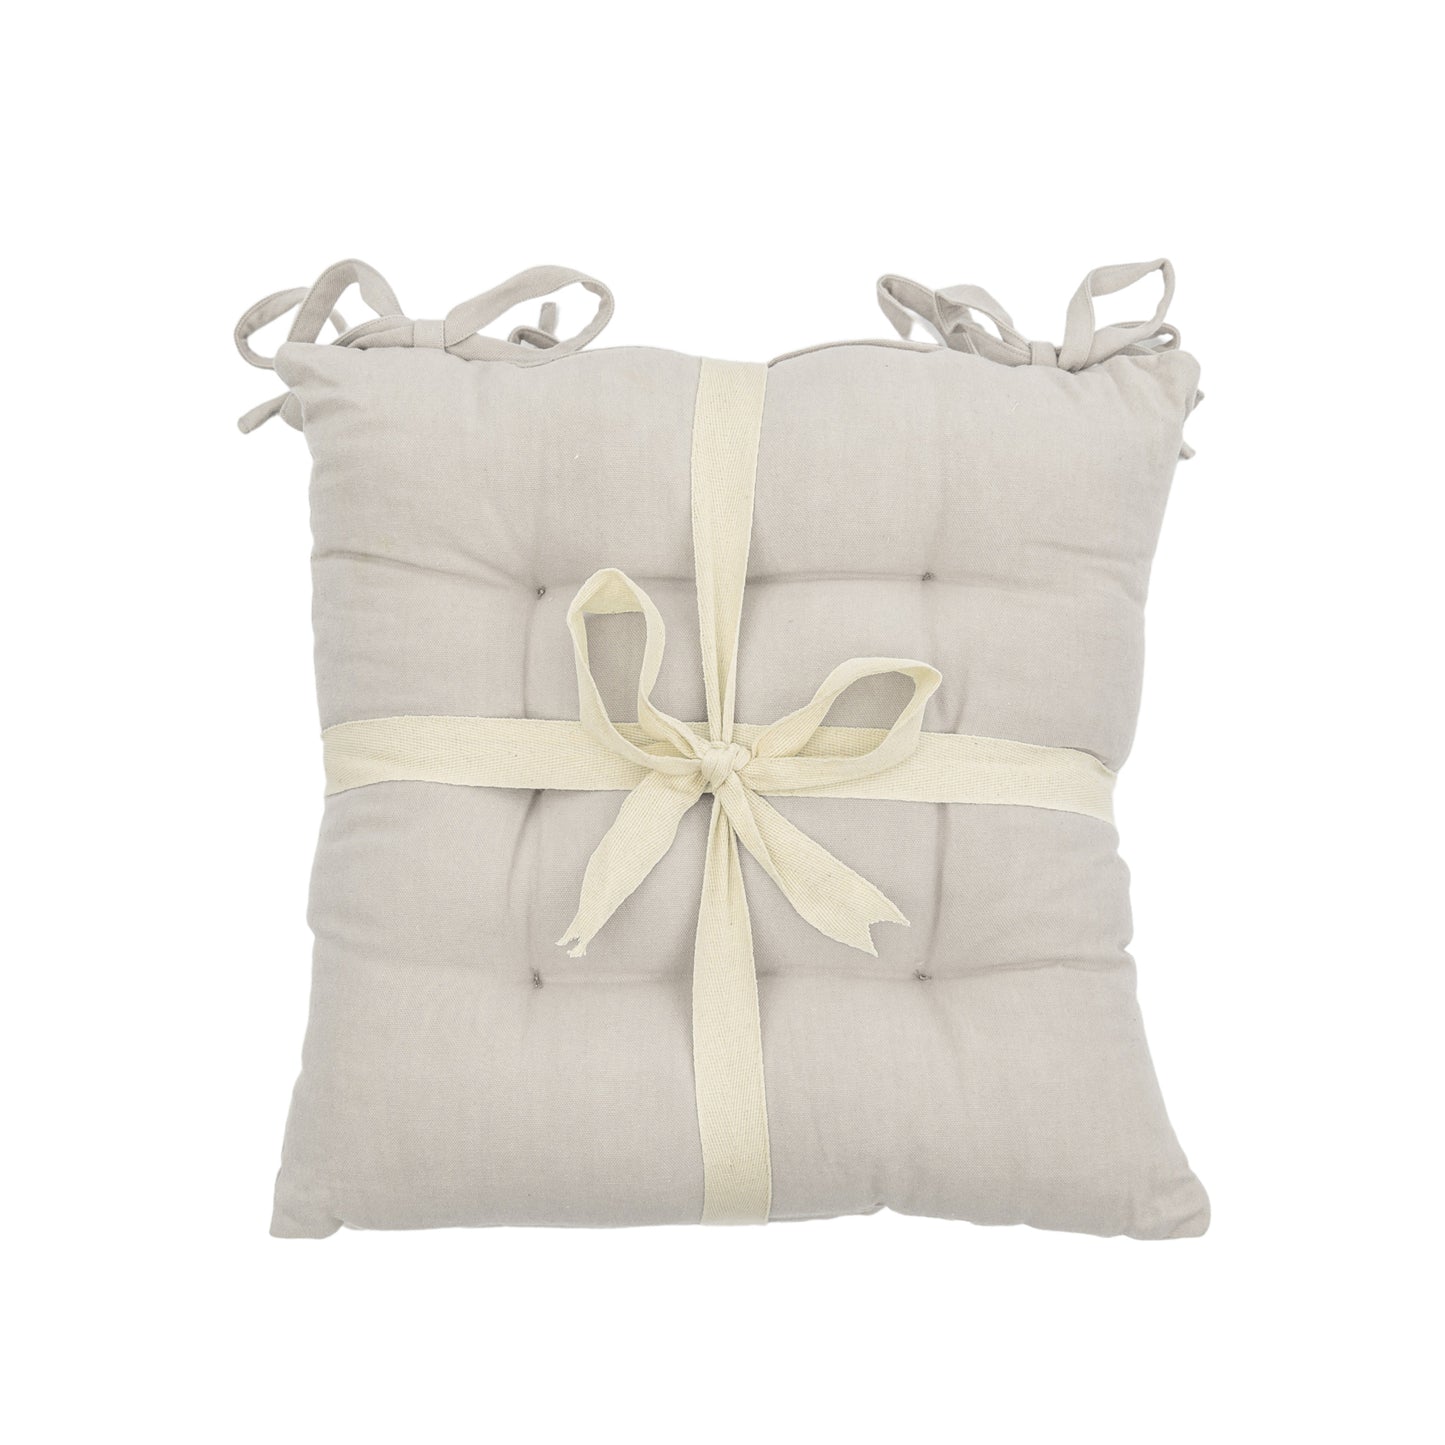 A SC Plain Cotton Seatpad Natural 430x430mm (2pk) seat cushion from Kikiathome.co.uk with an interior decor ribbon tied around it.